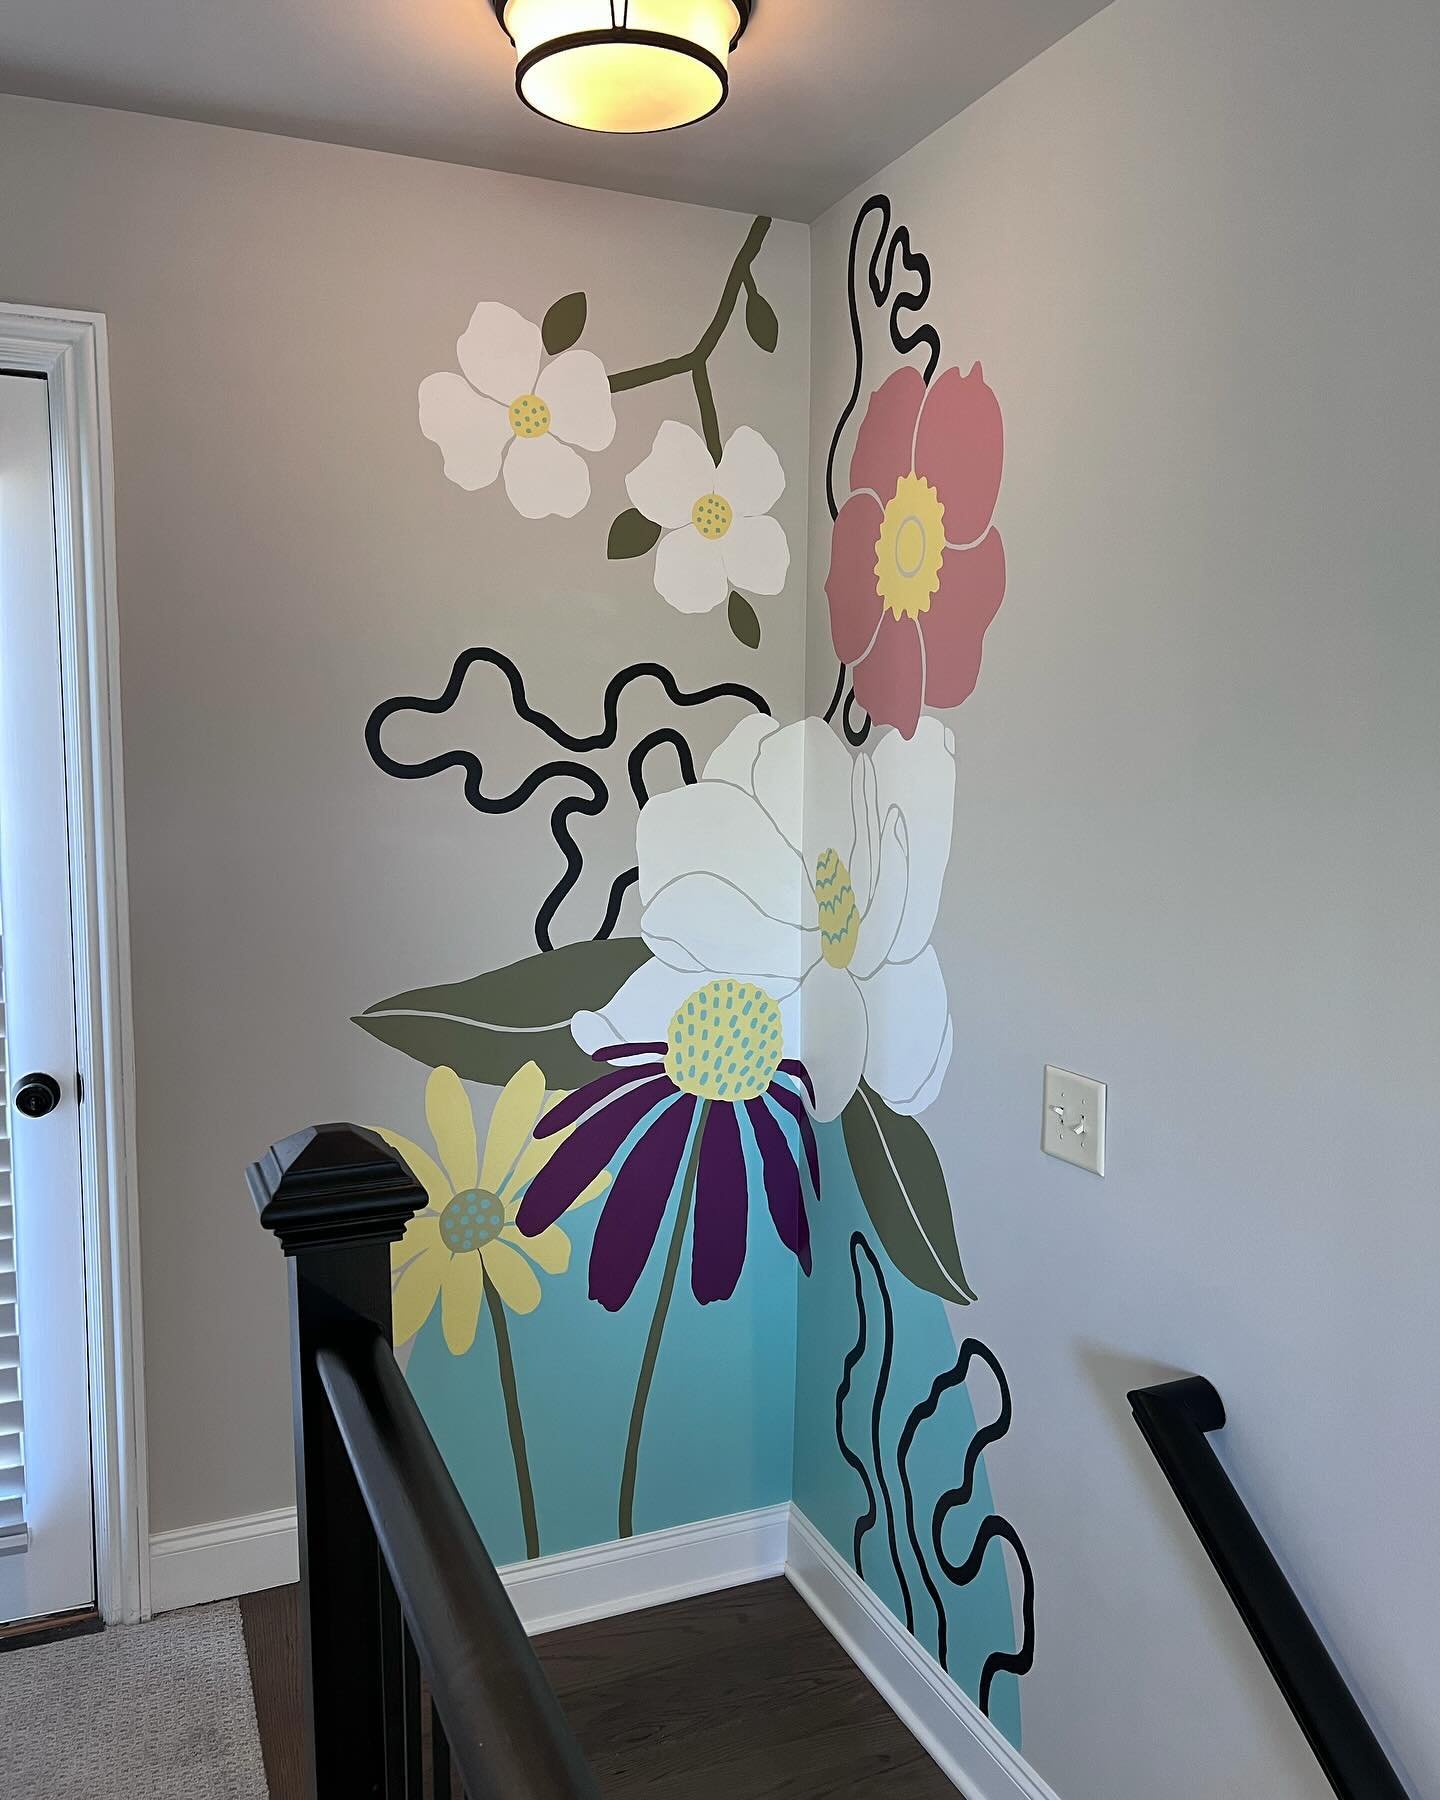 Murals don&rsquo;t have to be big to make an impact! This flower mural at the top of a stairway leads out to a rooftop floral mural of similar design. The mural is just visible from the lower level of the home, giving you a hint of the flowers above.